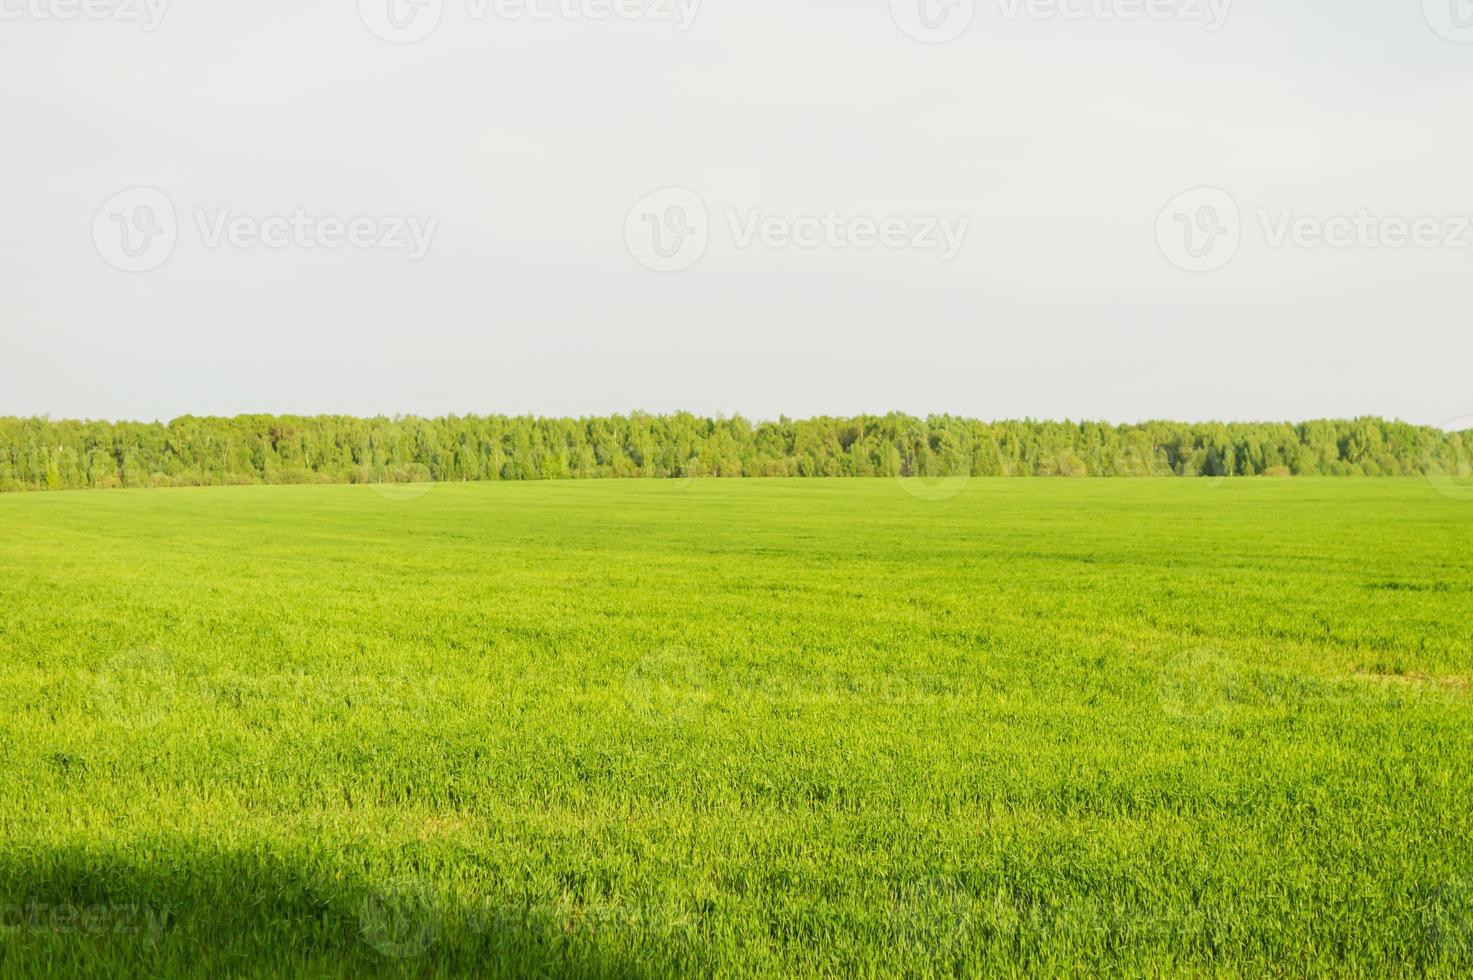 Field of green grass and perfect sky and trees. Rural spring landscape photo